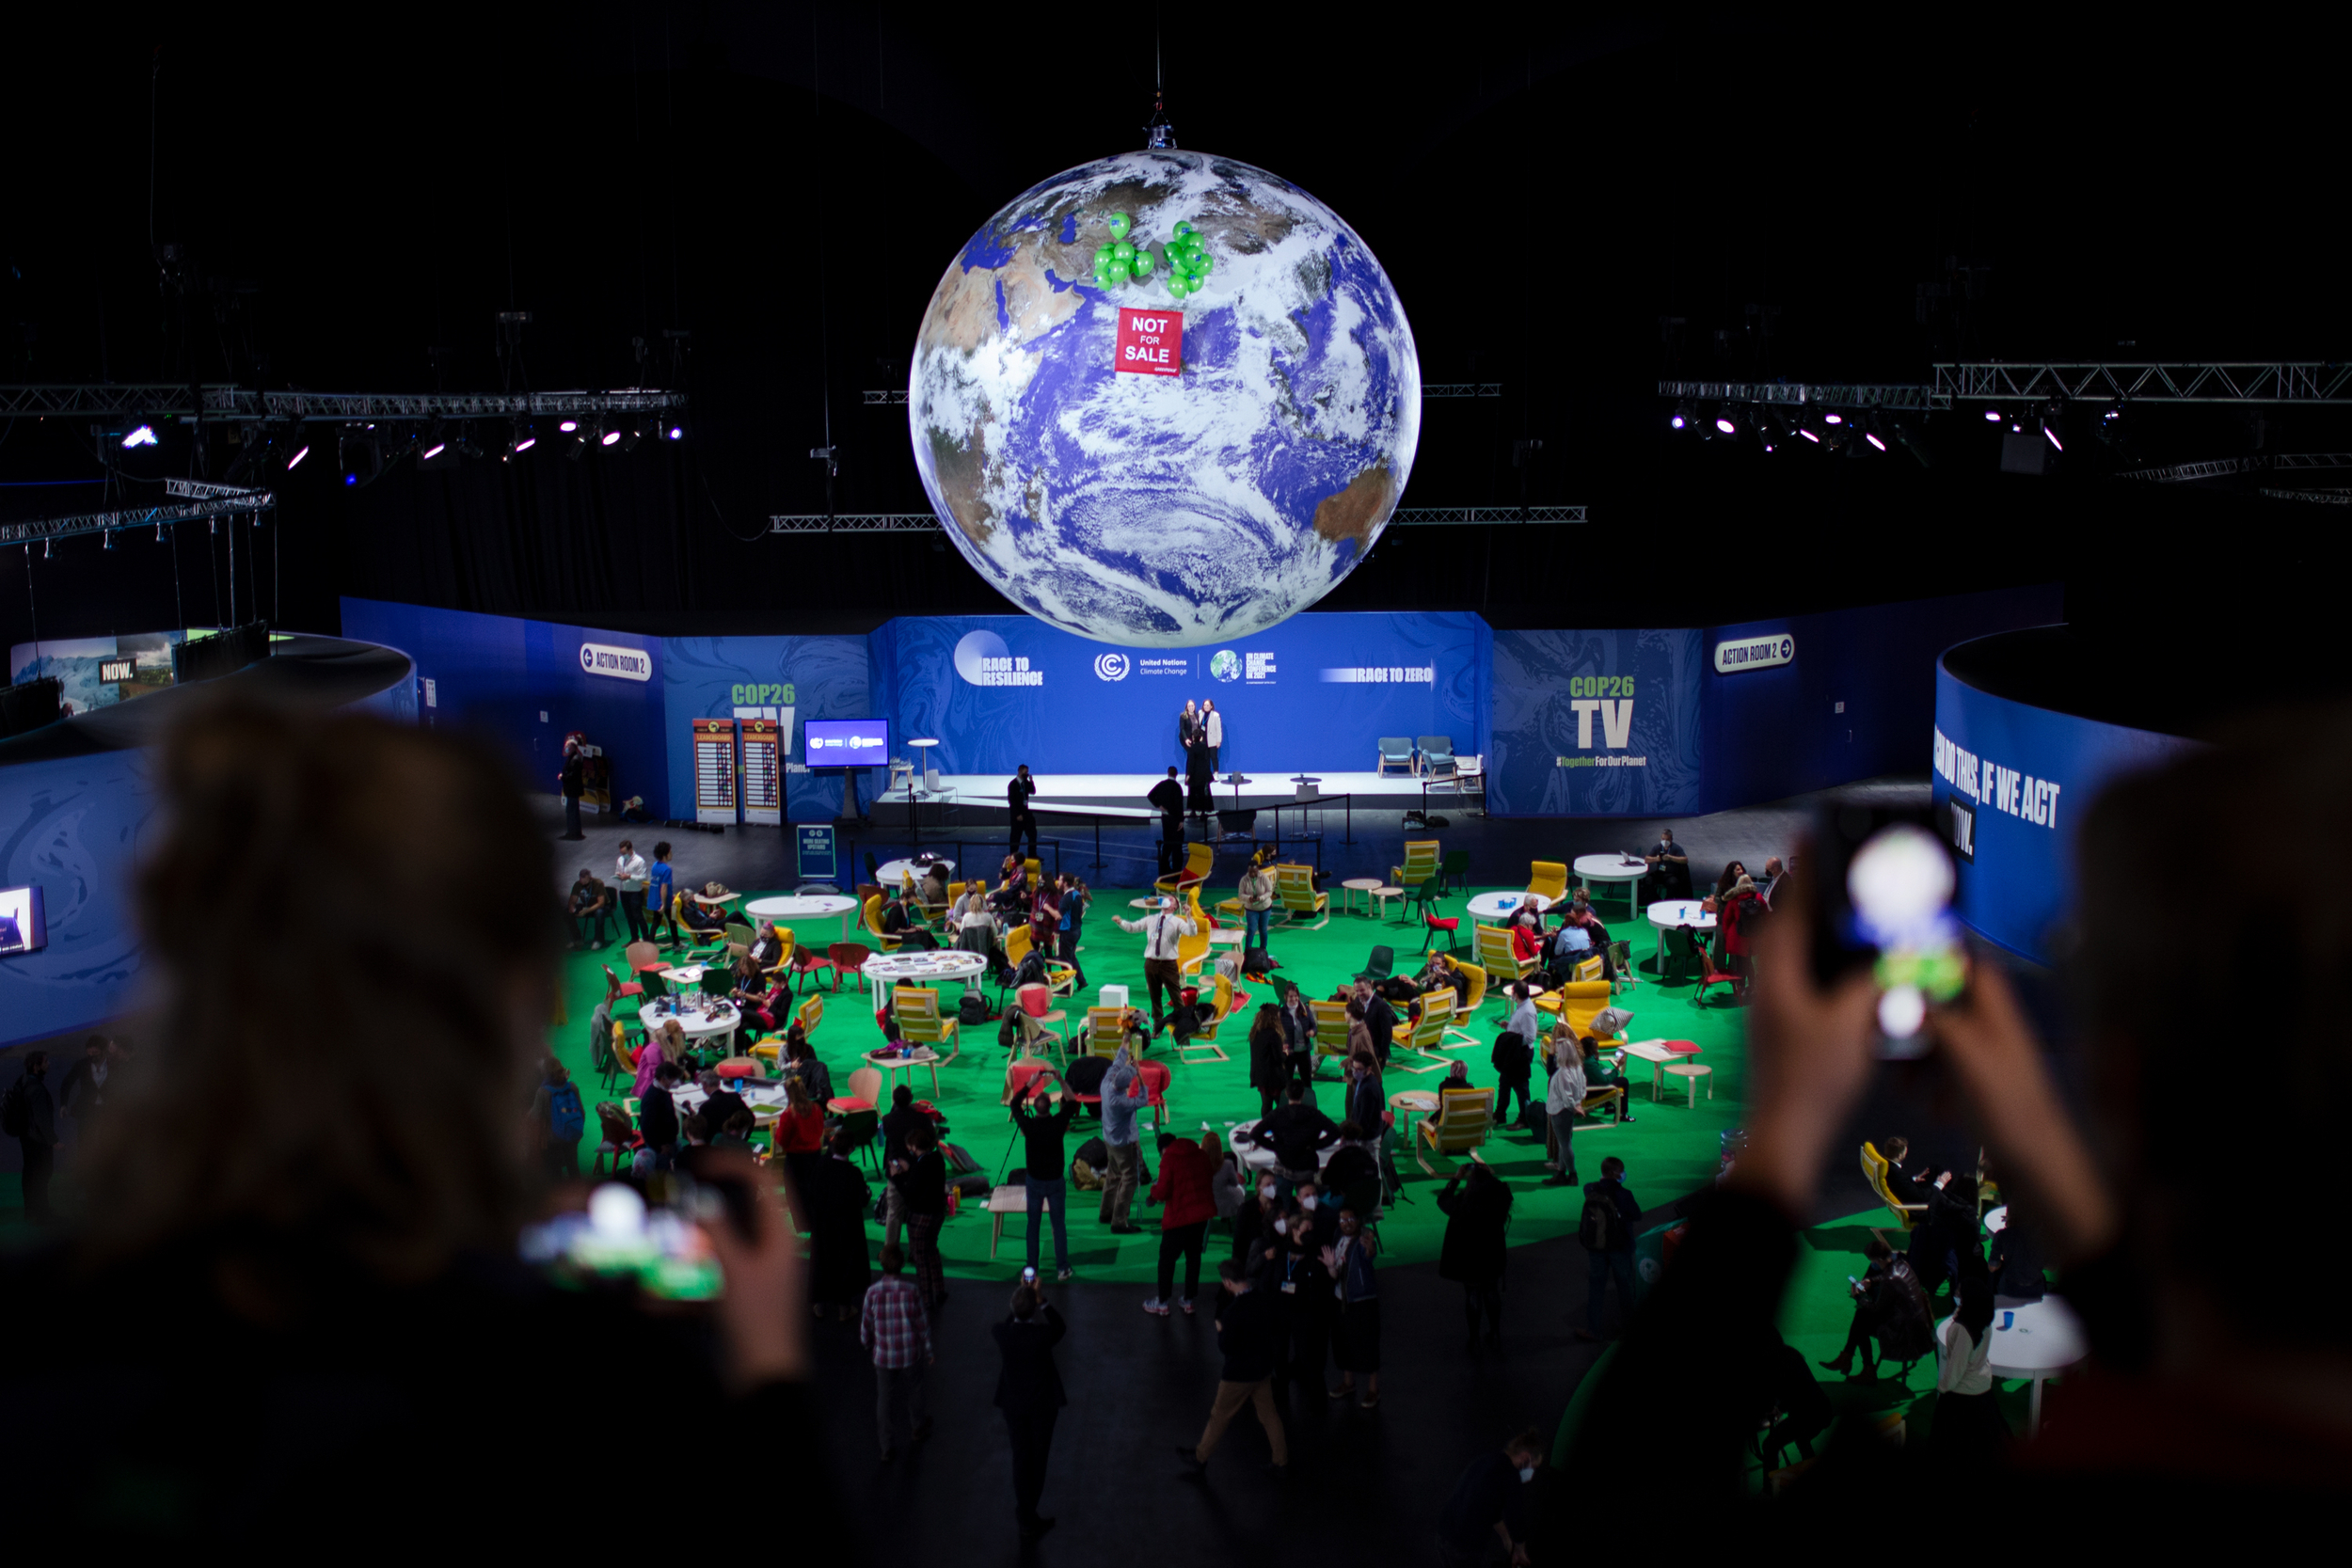 Wide view of the central concourse at COP26. People are gathered underneath a giant globe that hangs overhead. Lifted by green balloons, a banner floats in front of the globe reading 'Not for sale'.